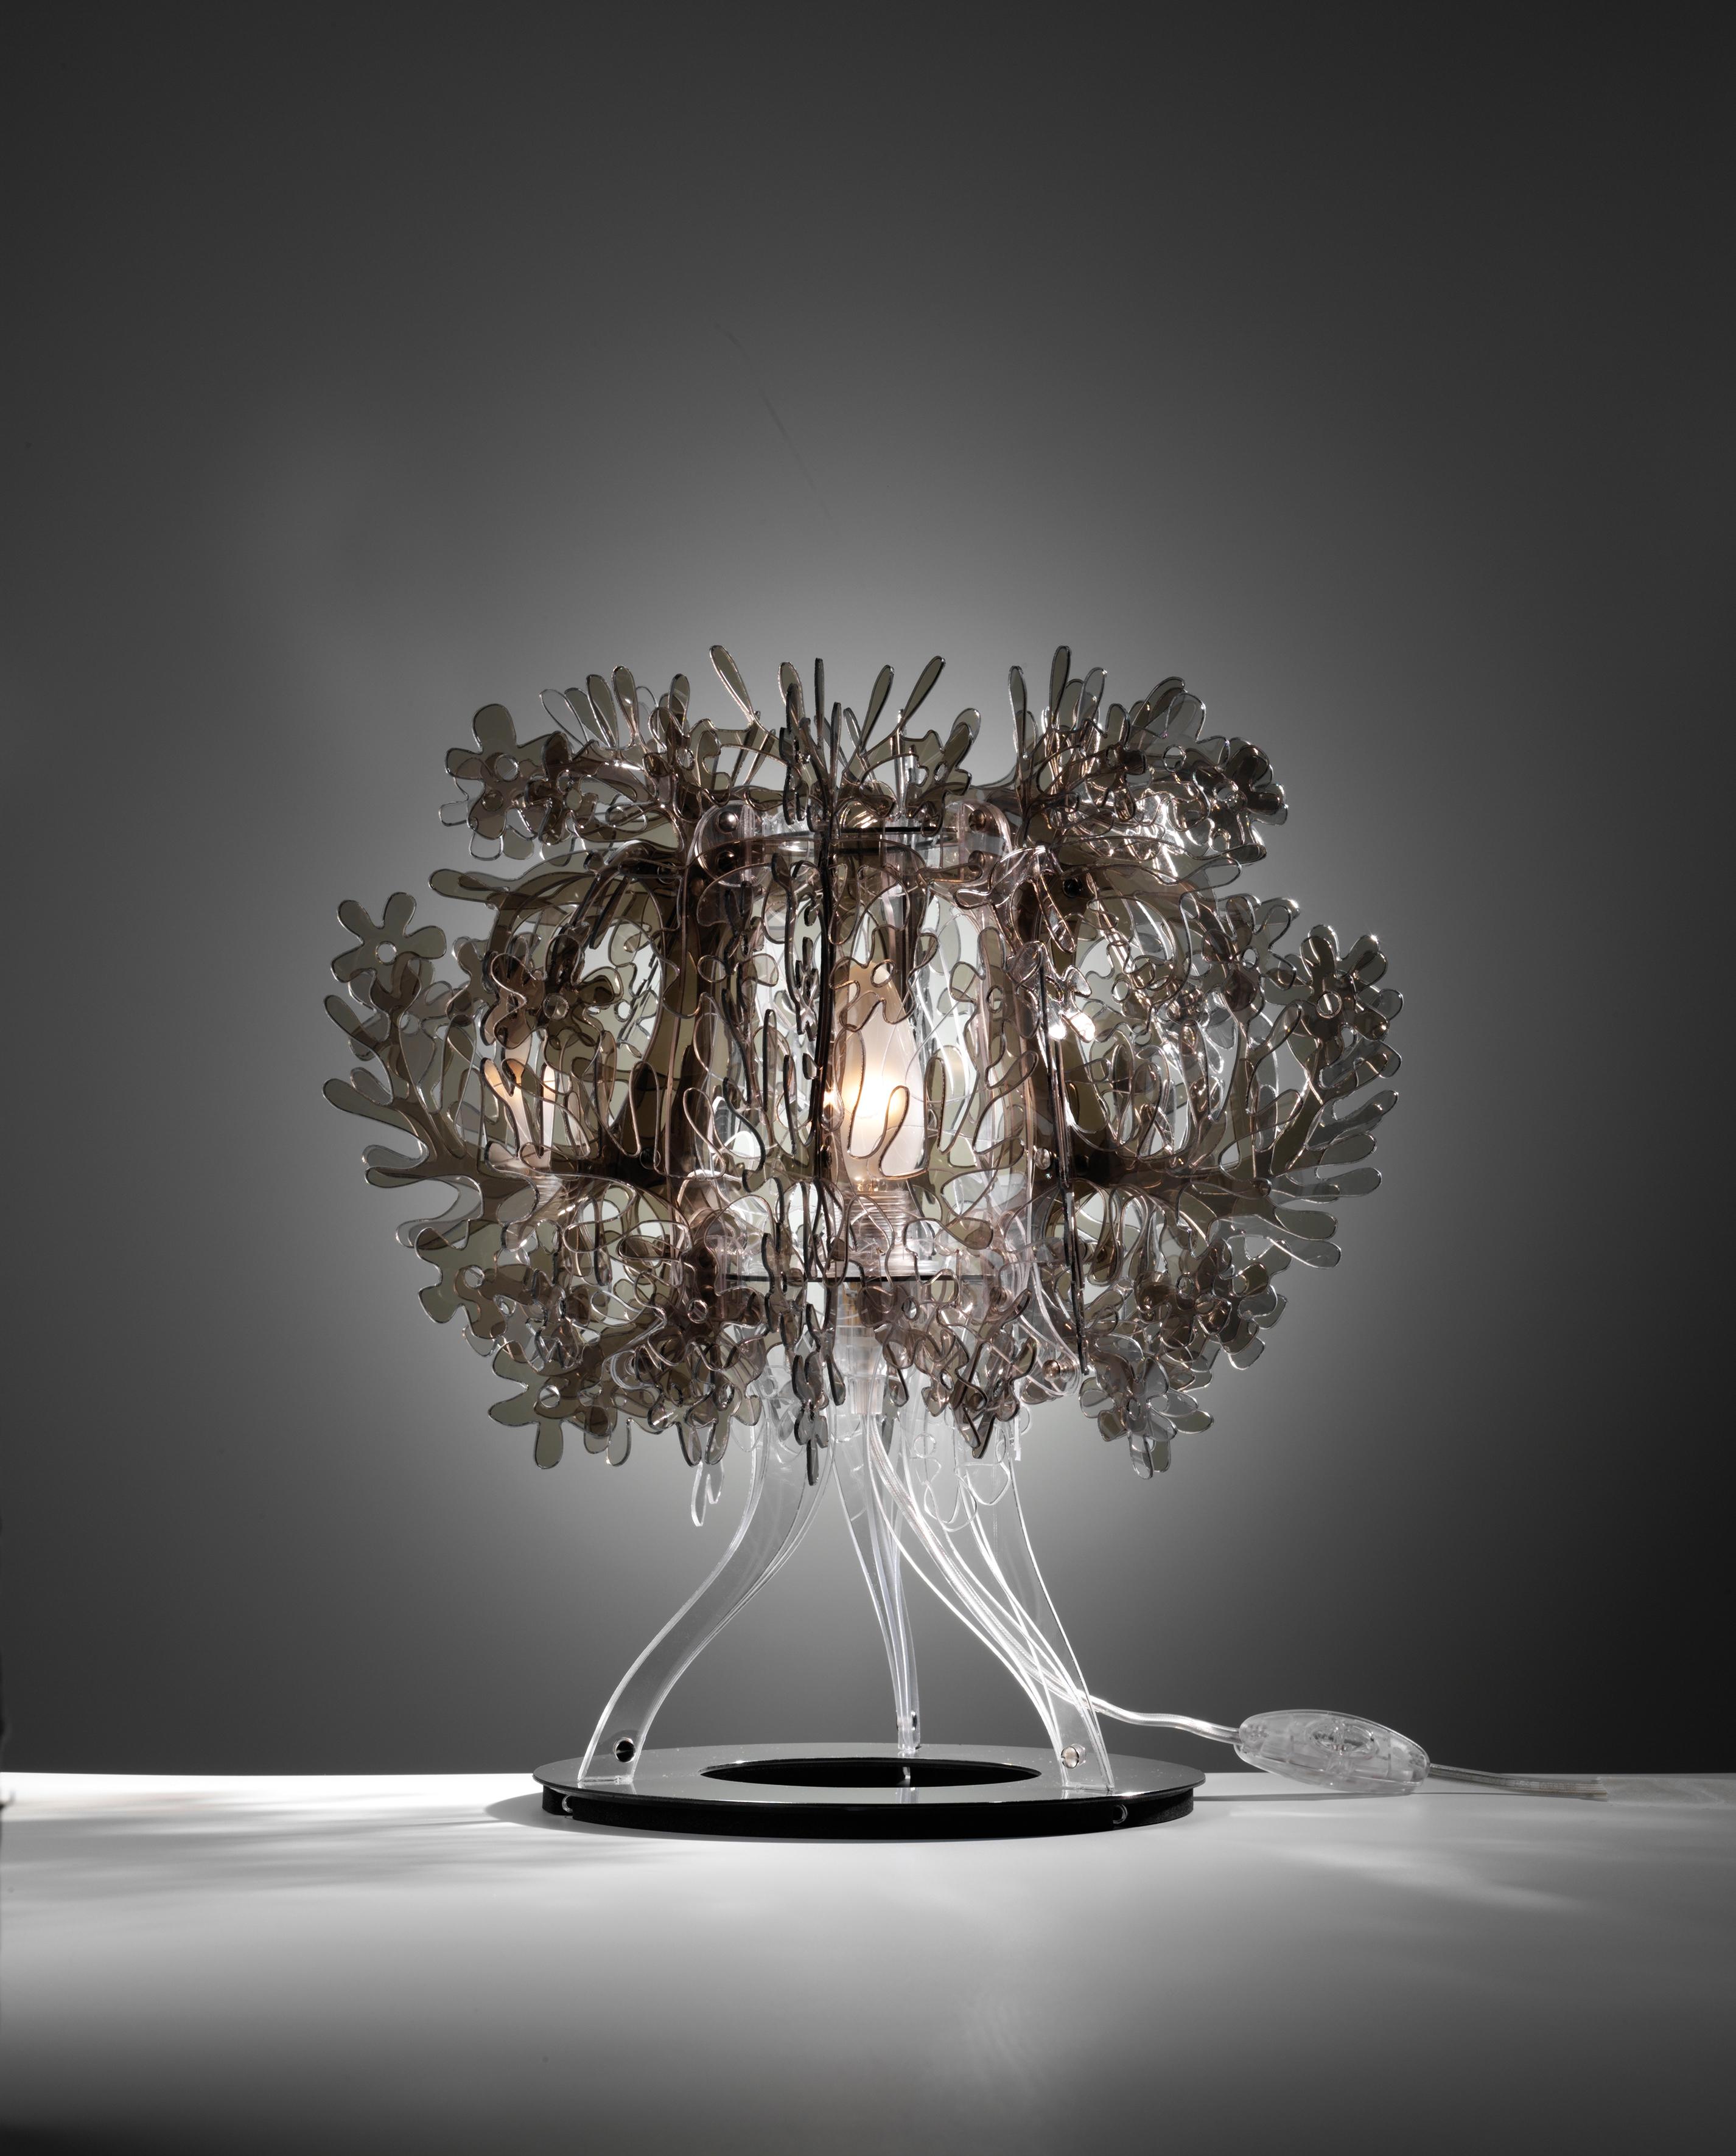 Suggestive, realistic and welcoming; Fiorella’s natural details conjure up a world covered in flora. SLAMP’s expressive powers and fresh figurativeness meet in a flurry of reflective, luminous petals that transform and enchant any interior with